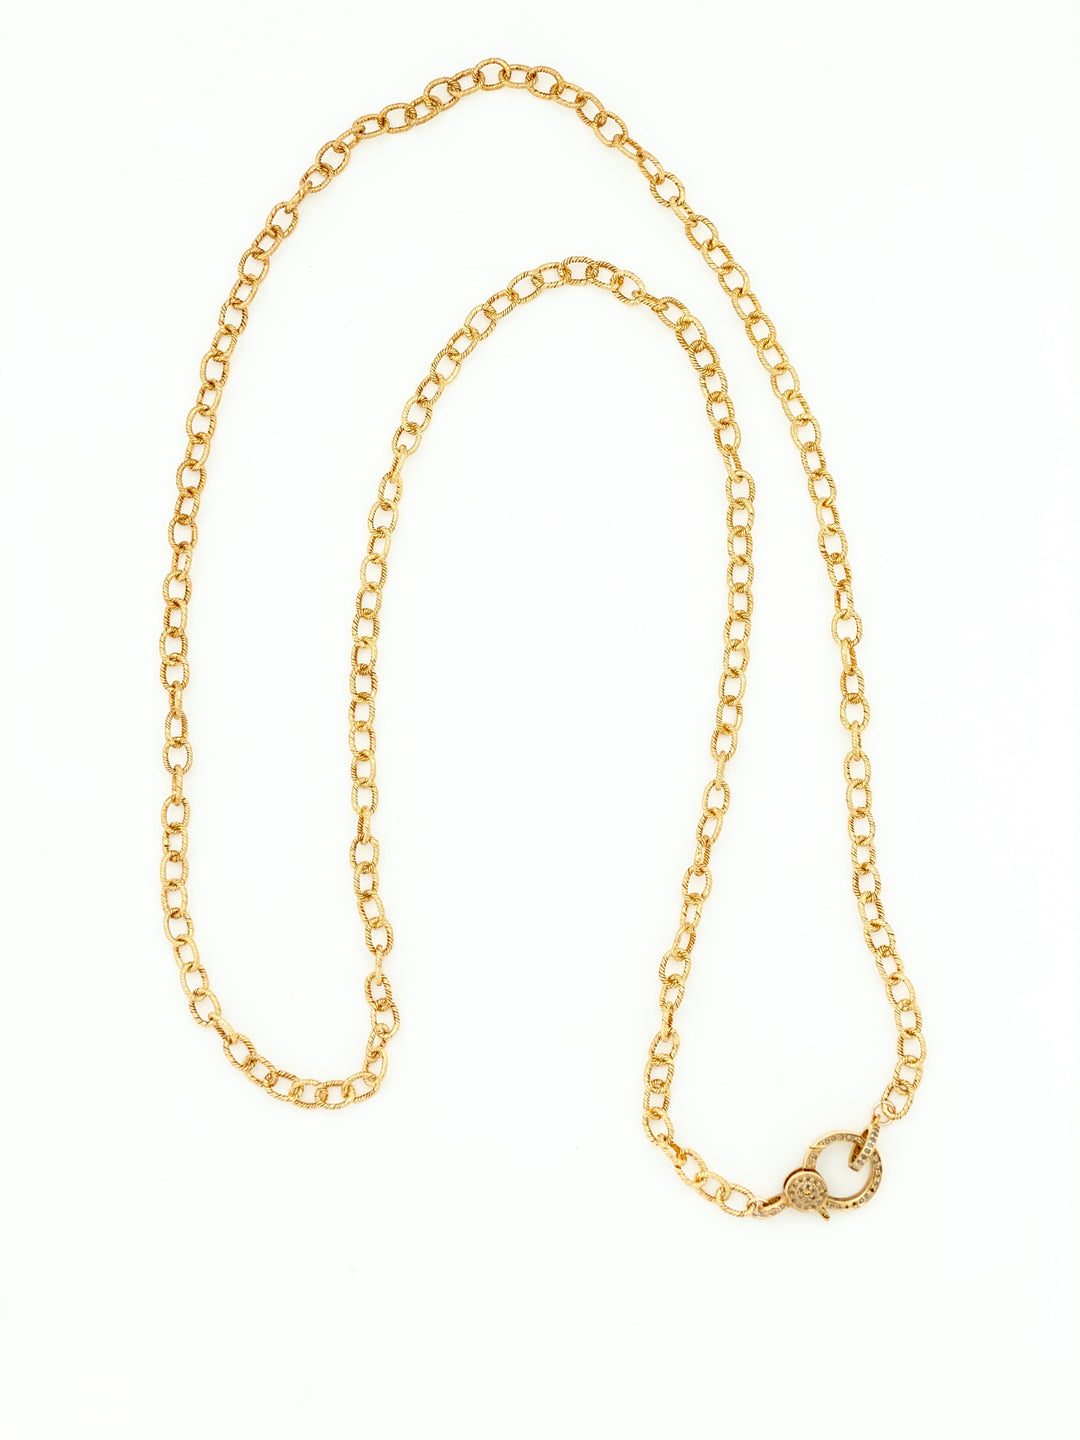 Gold Vermeil Chain with Pave Diamond Clasp